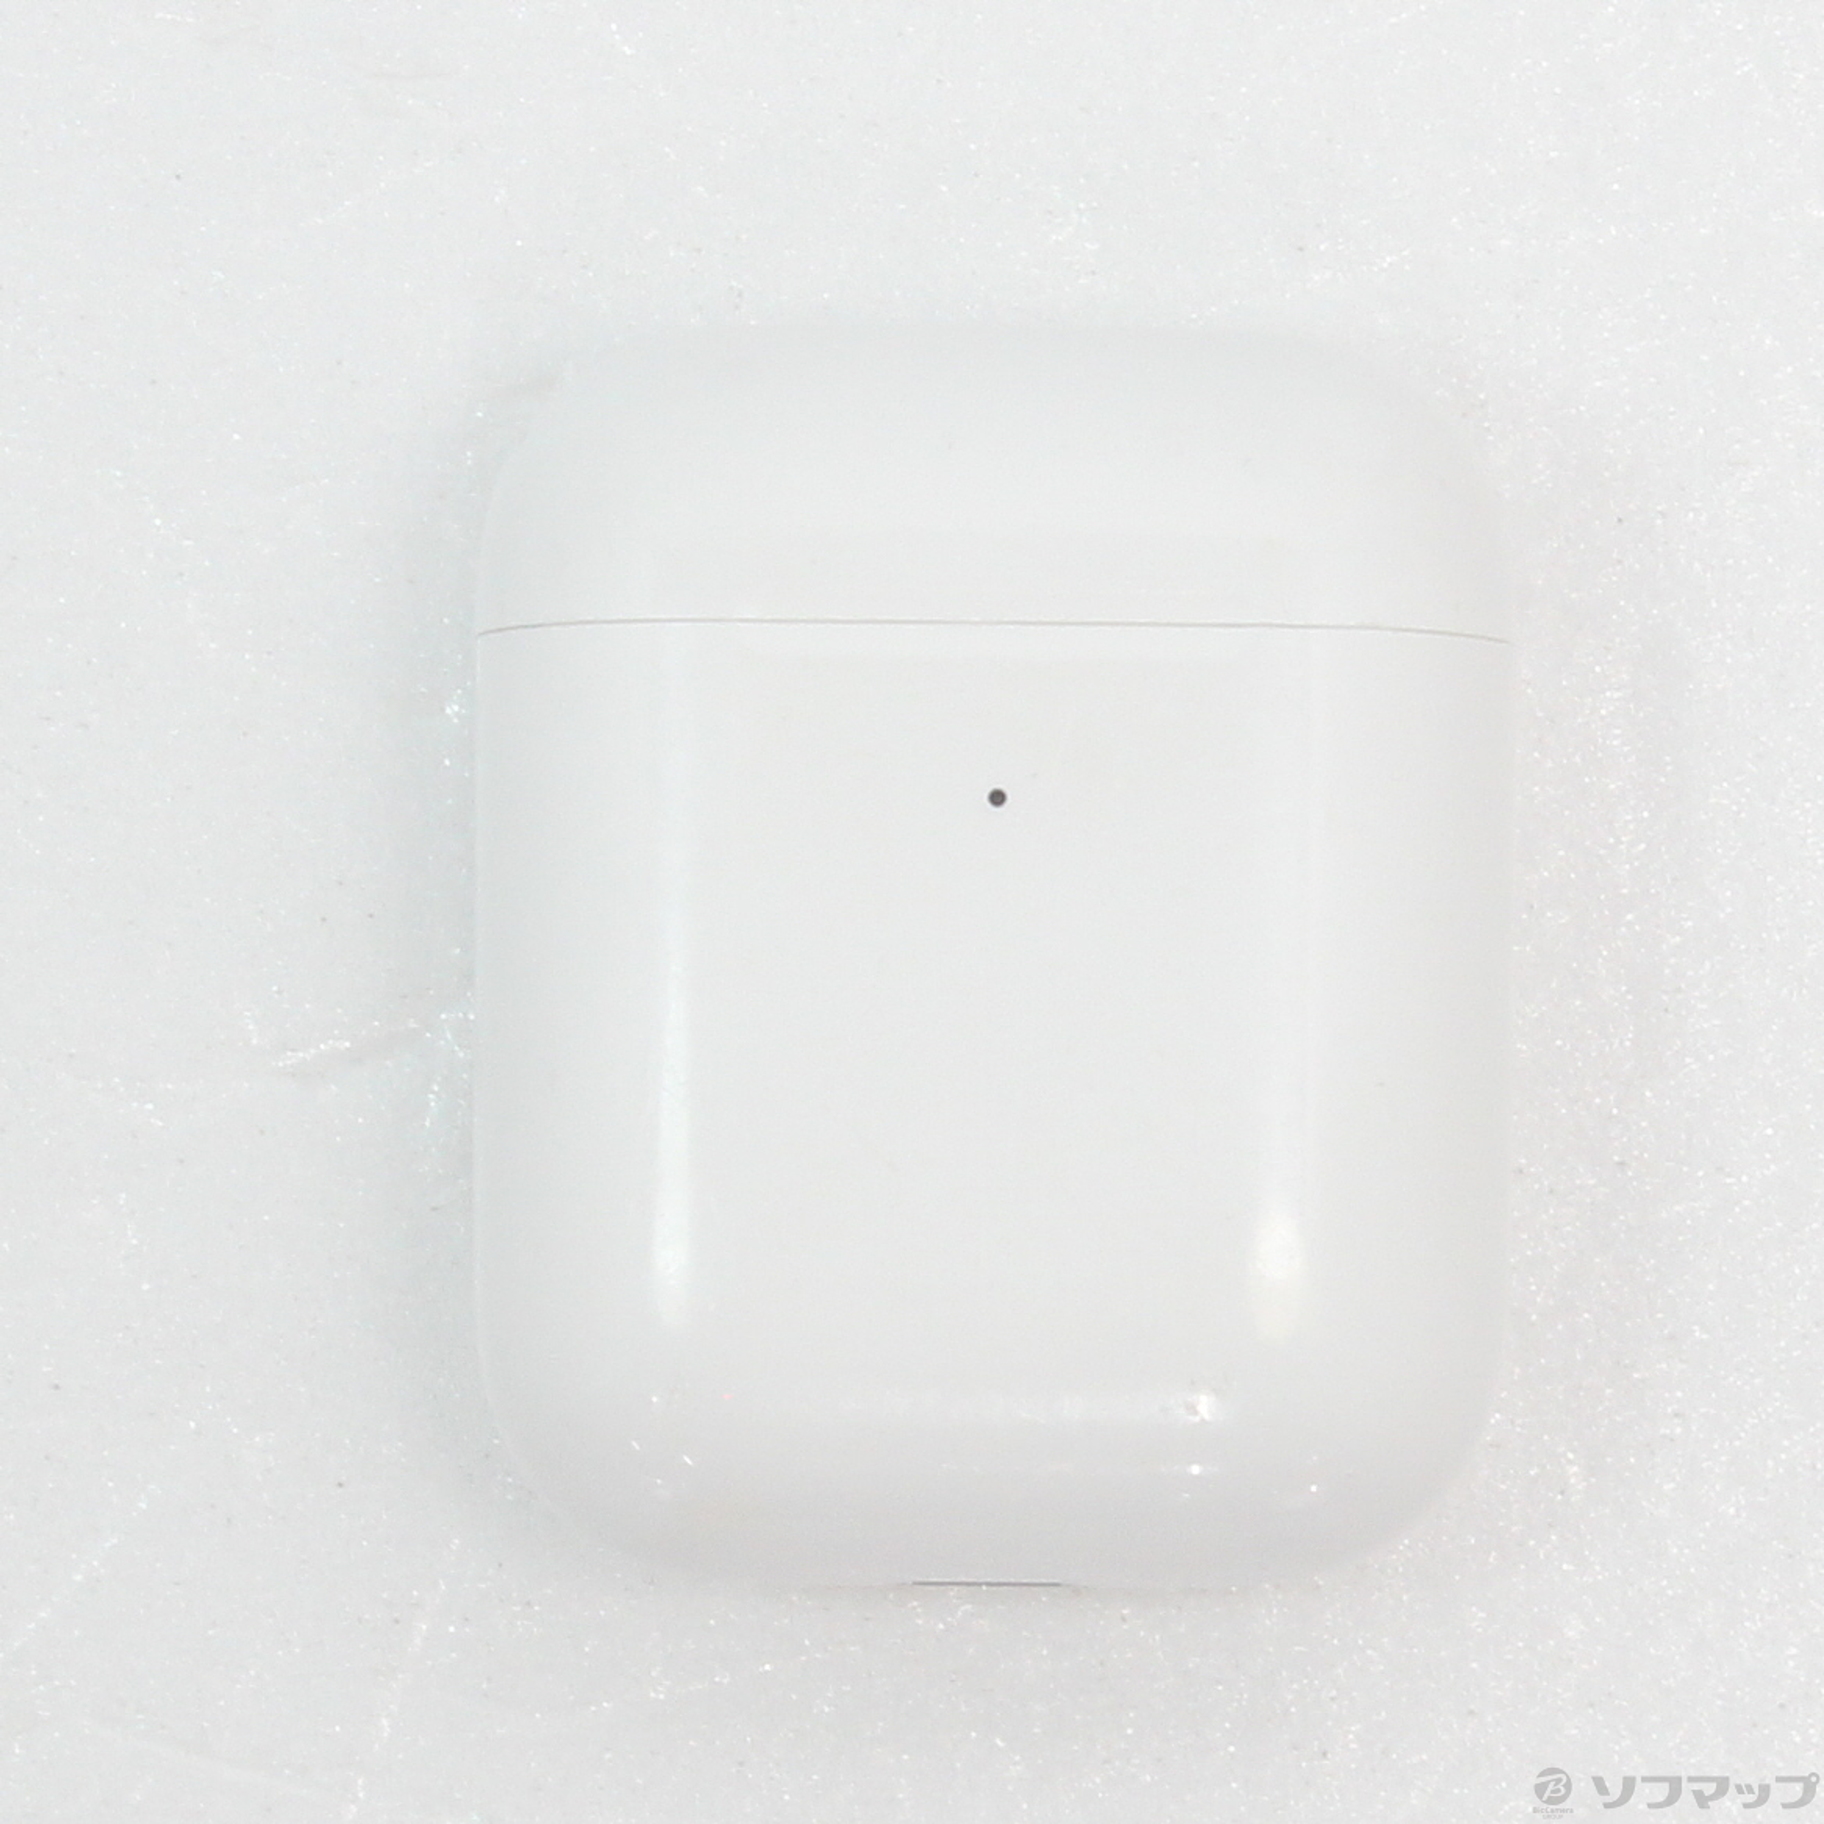 MRXJ2J/A AirPods 第二世代 charging case - イヤフォン